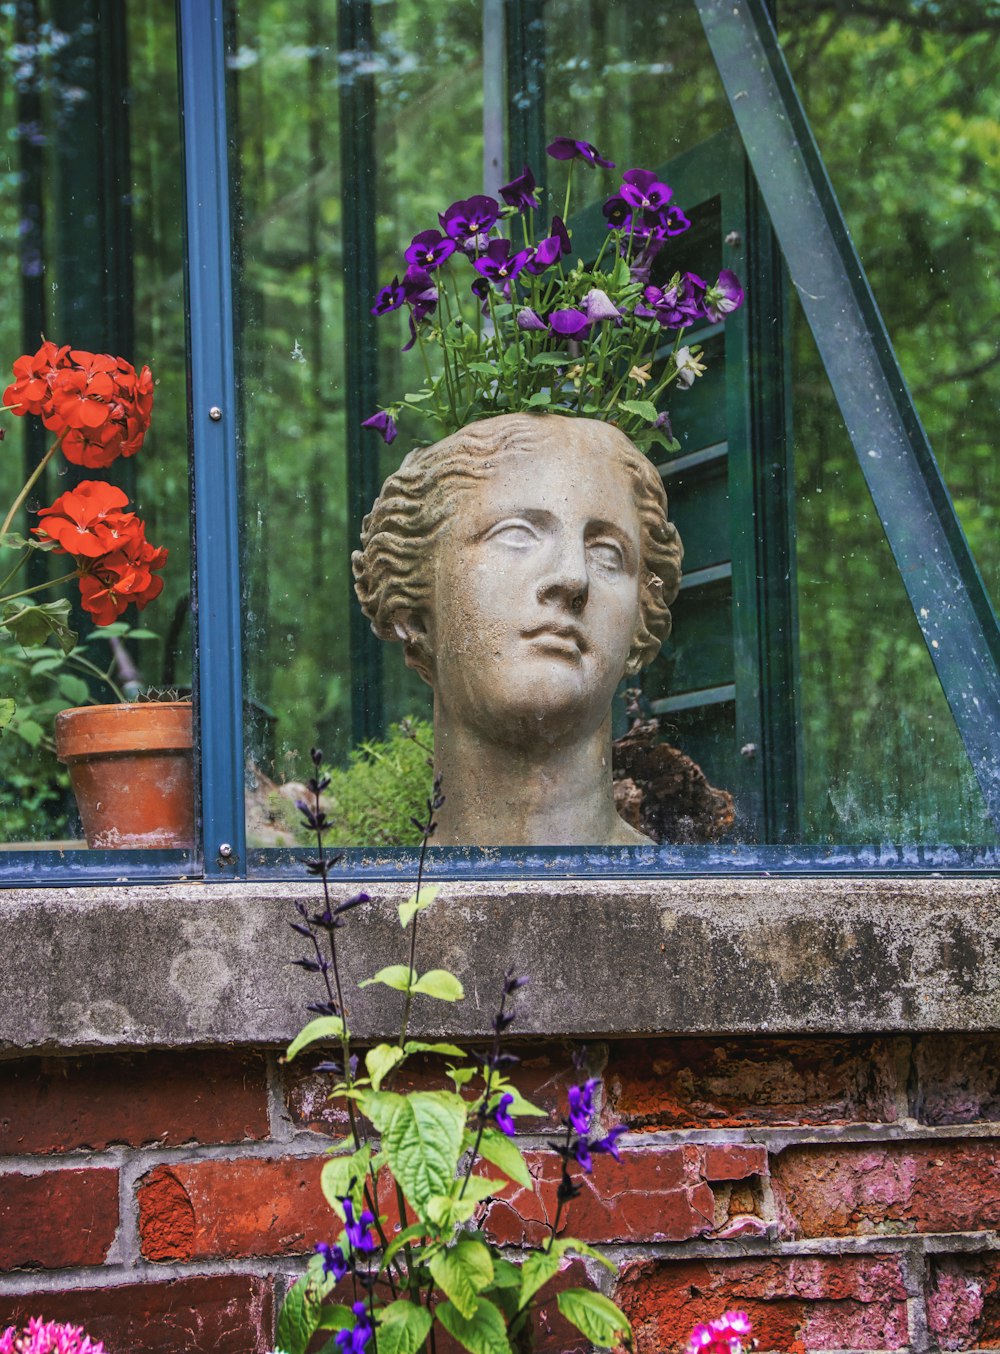 a statue of a woman with flowers in her hair